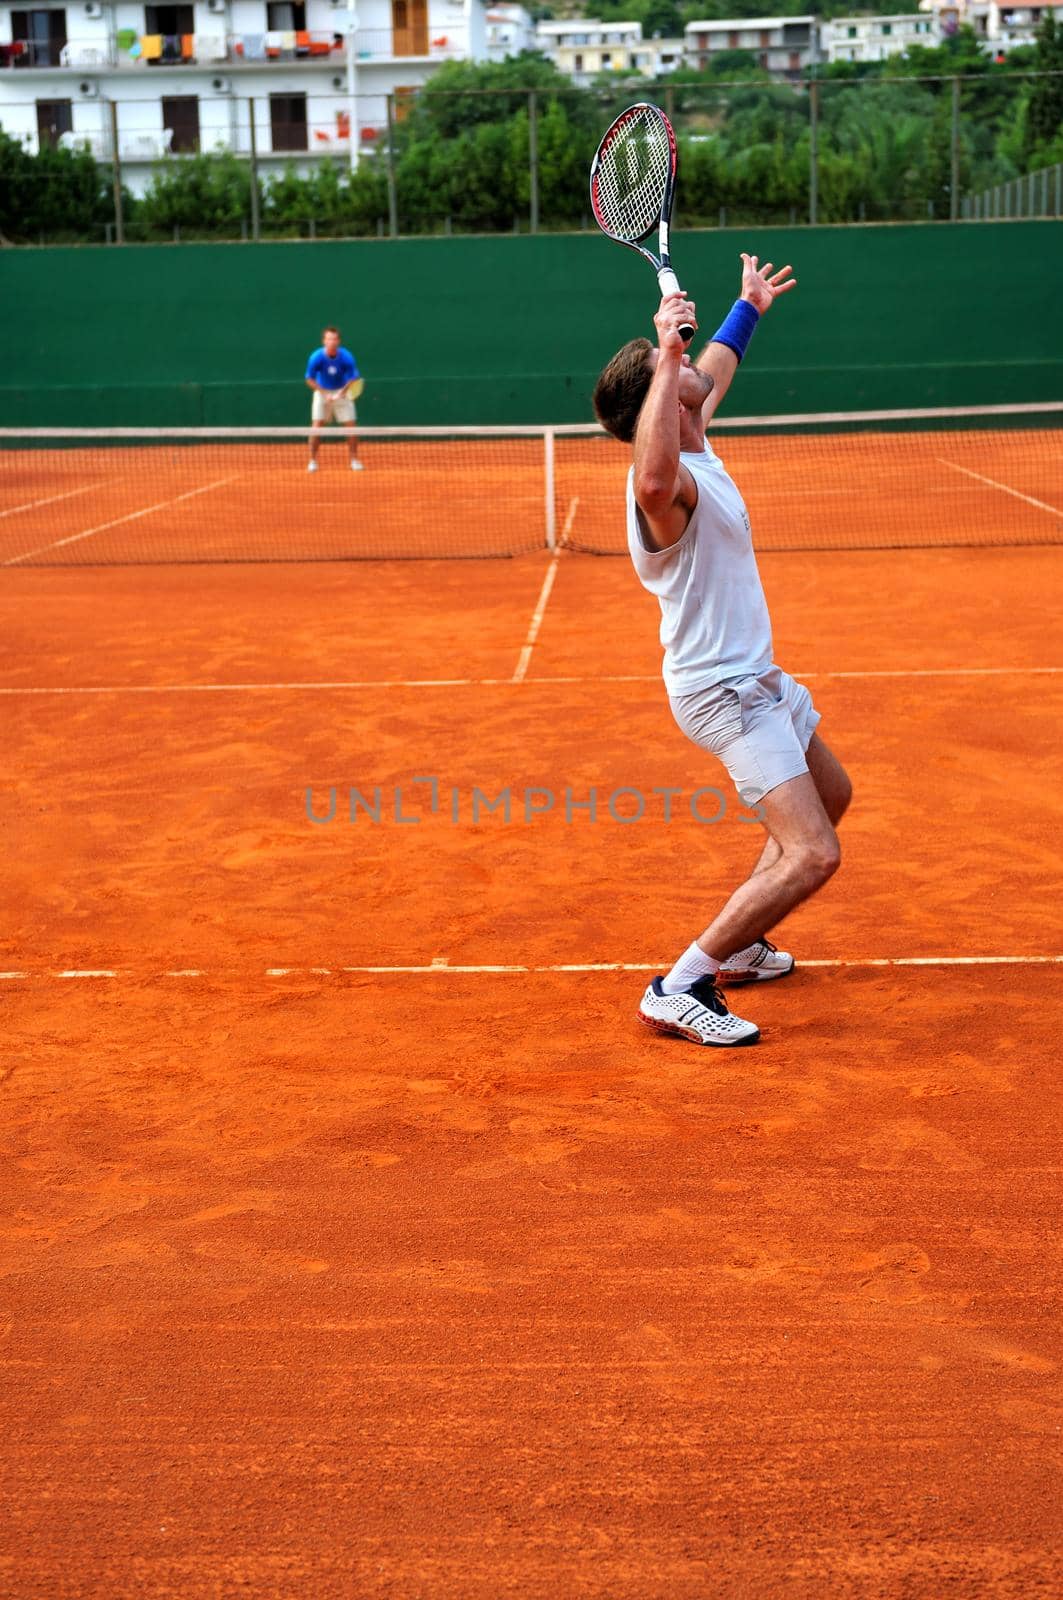 One Man play tennis on outdoor court